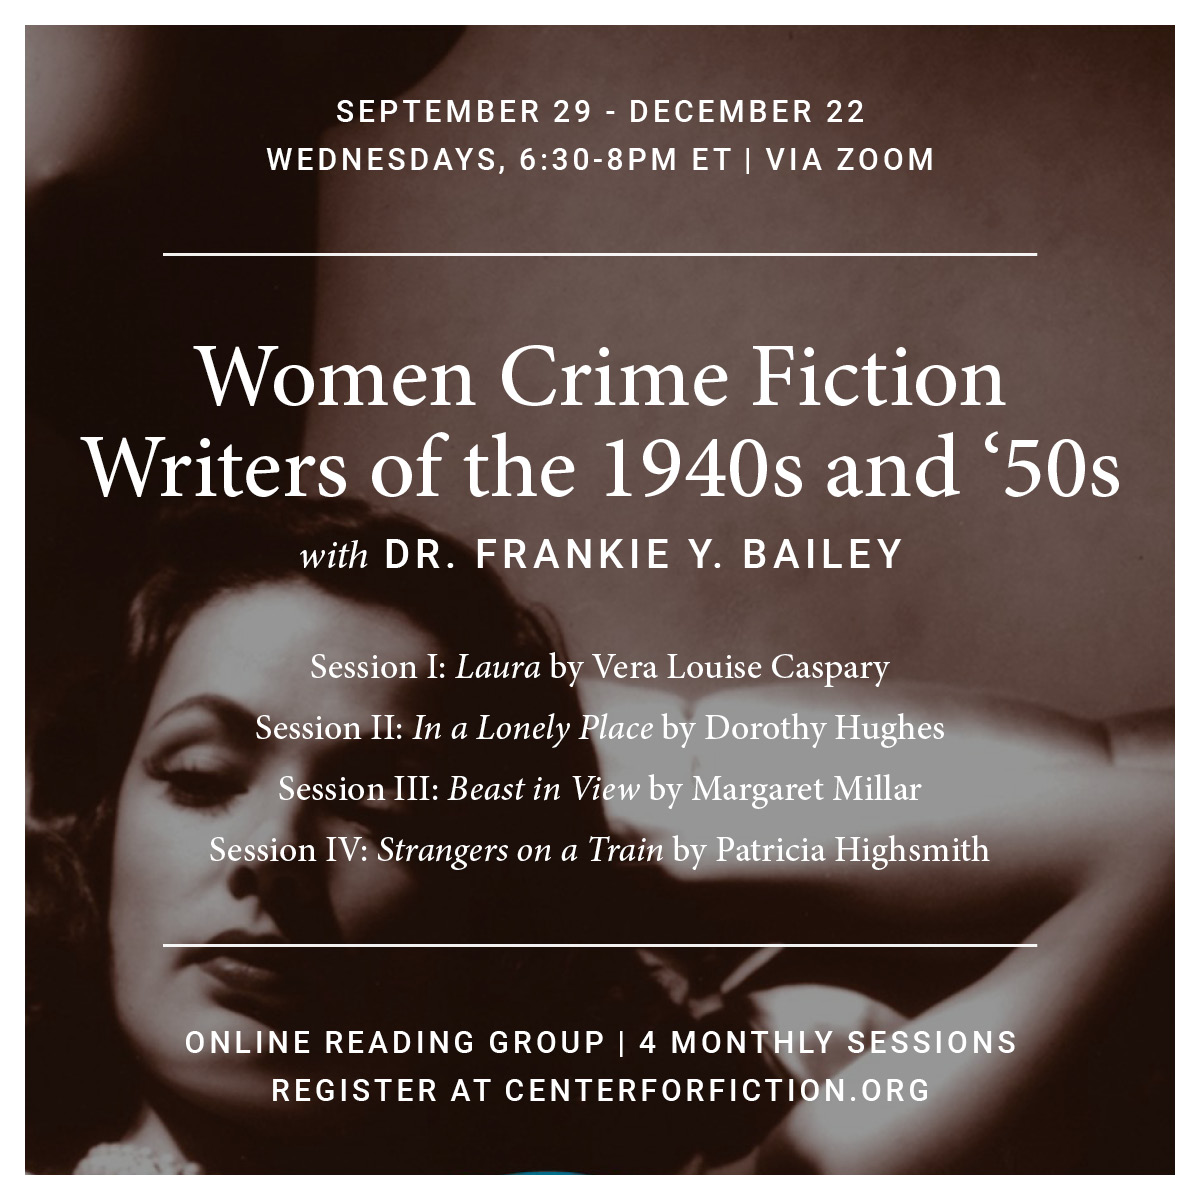 Women Crime Writers, 1940s and 50s